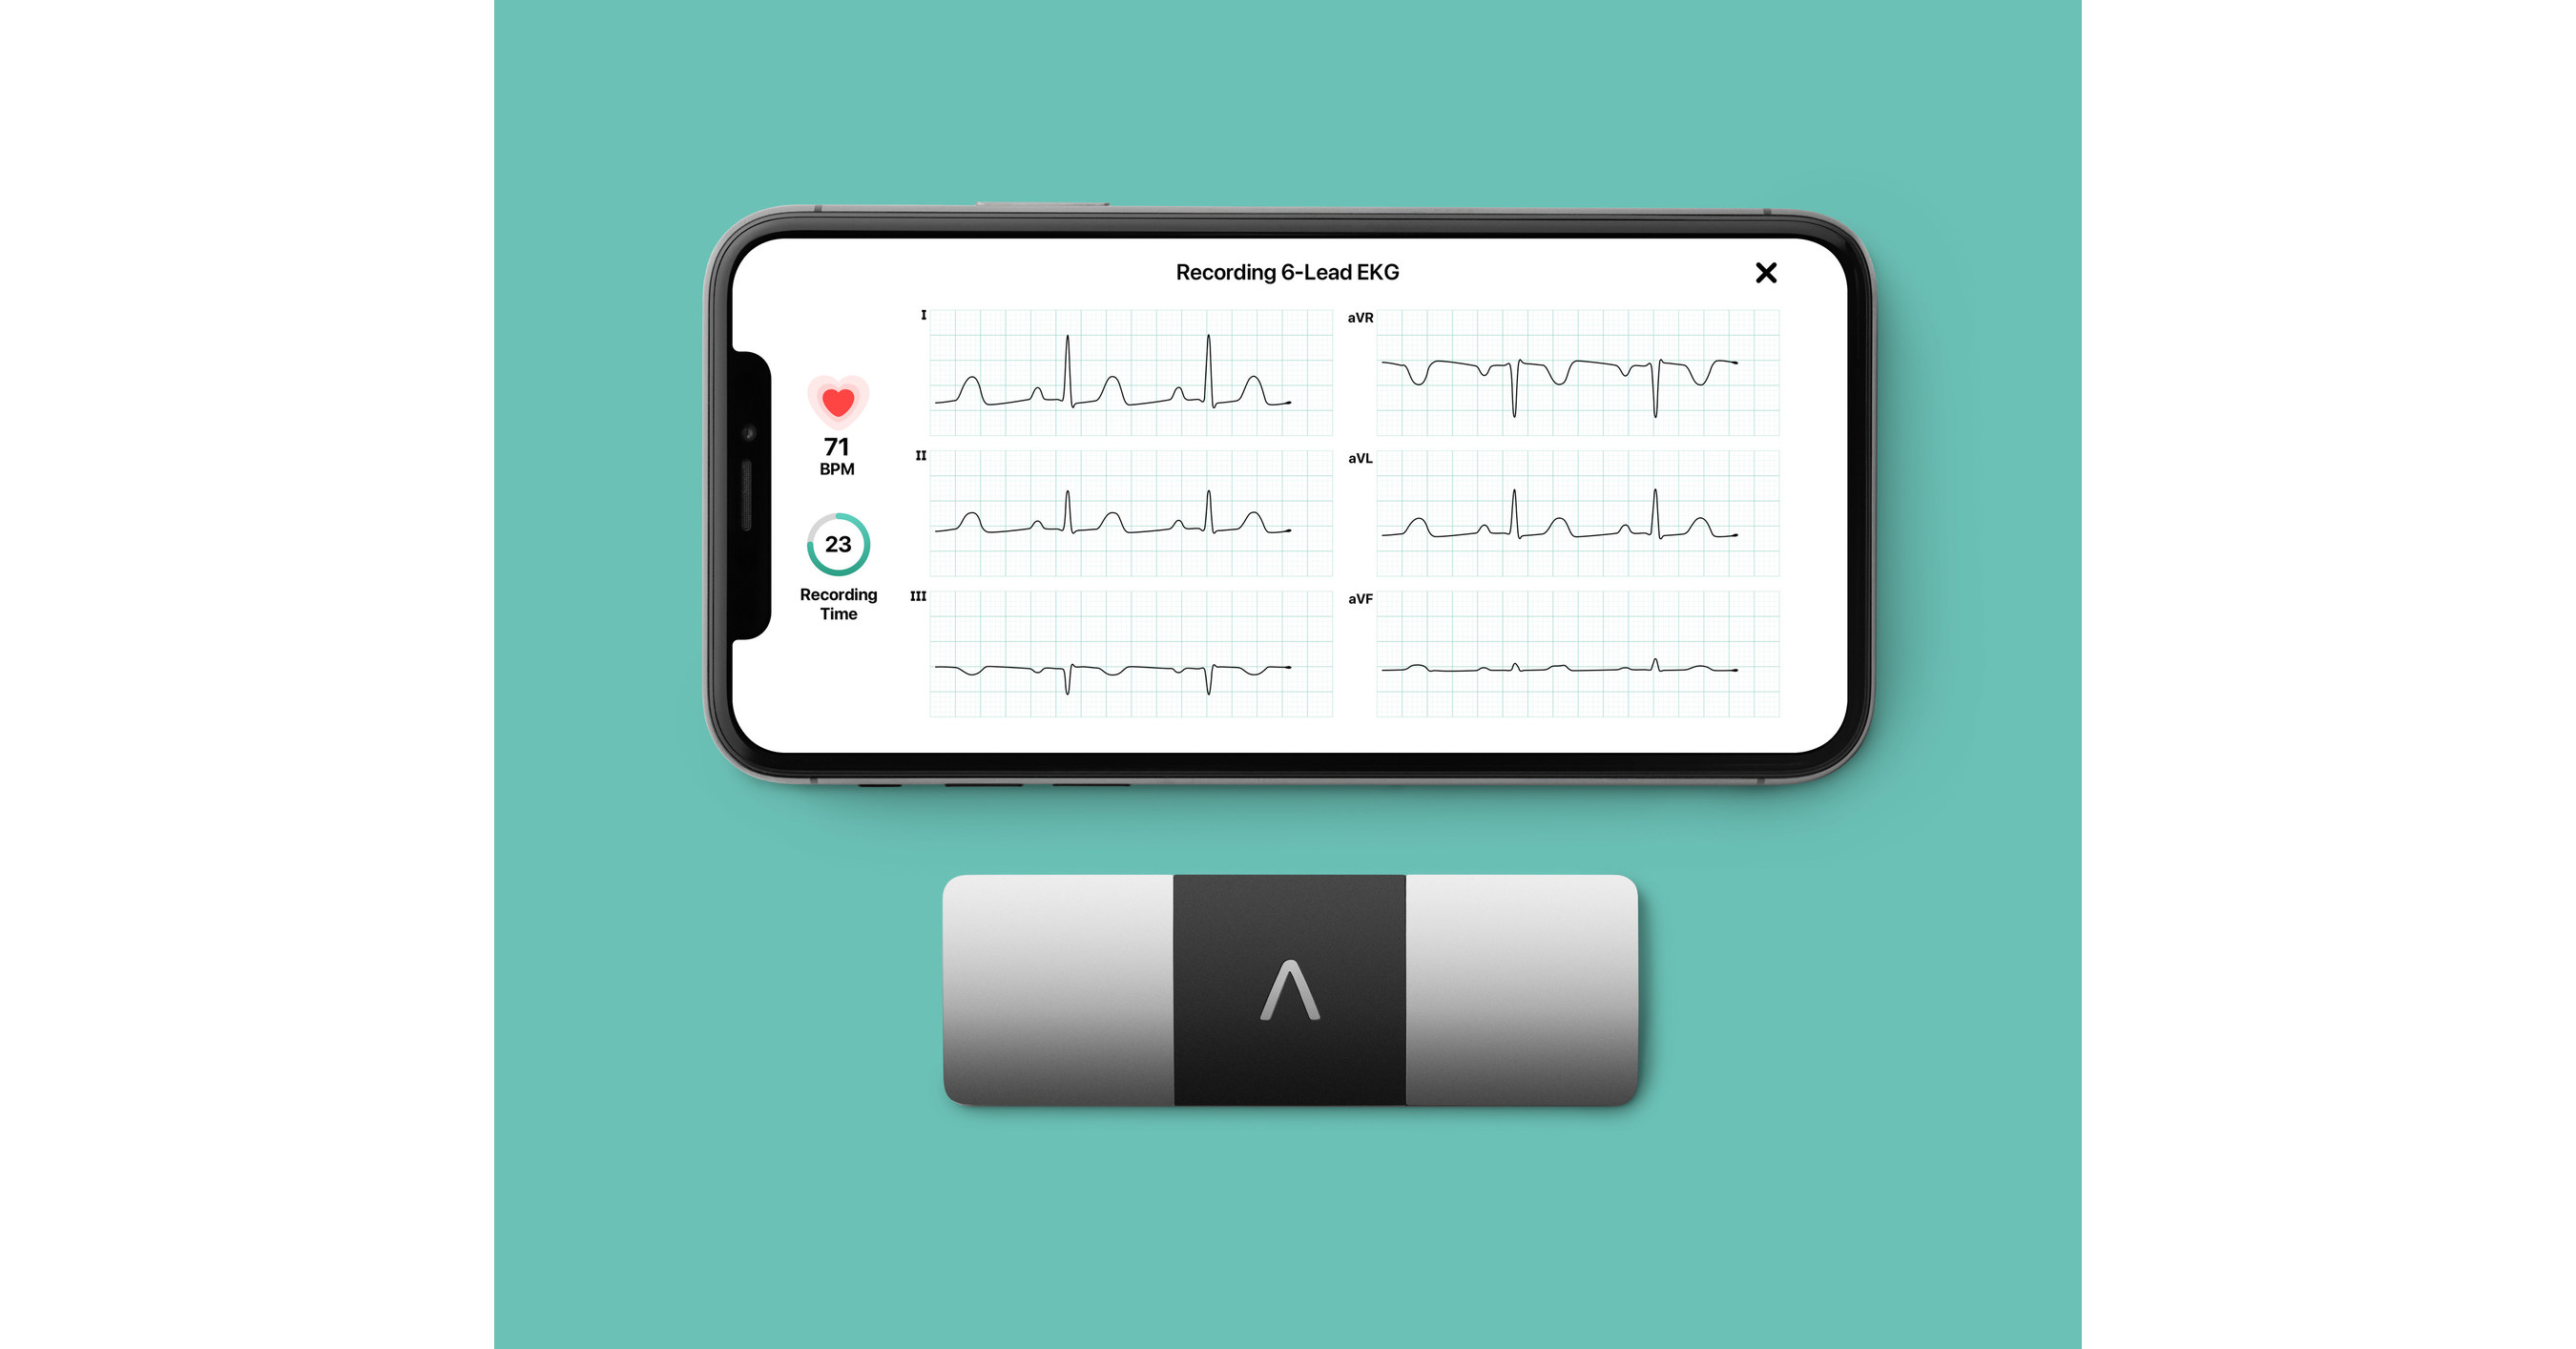 IronRod Health - How To: Record Your EKG Using the KardiaMobile 6L in the  Omron App 